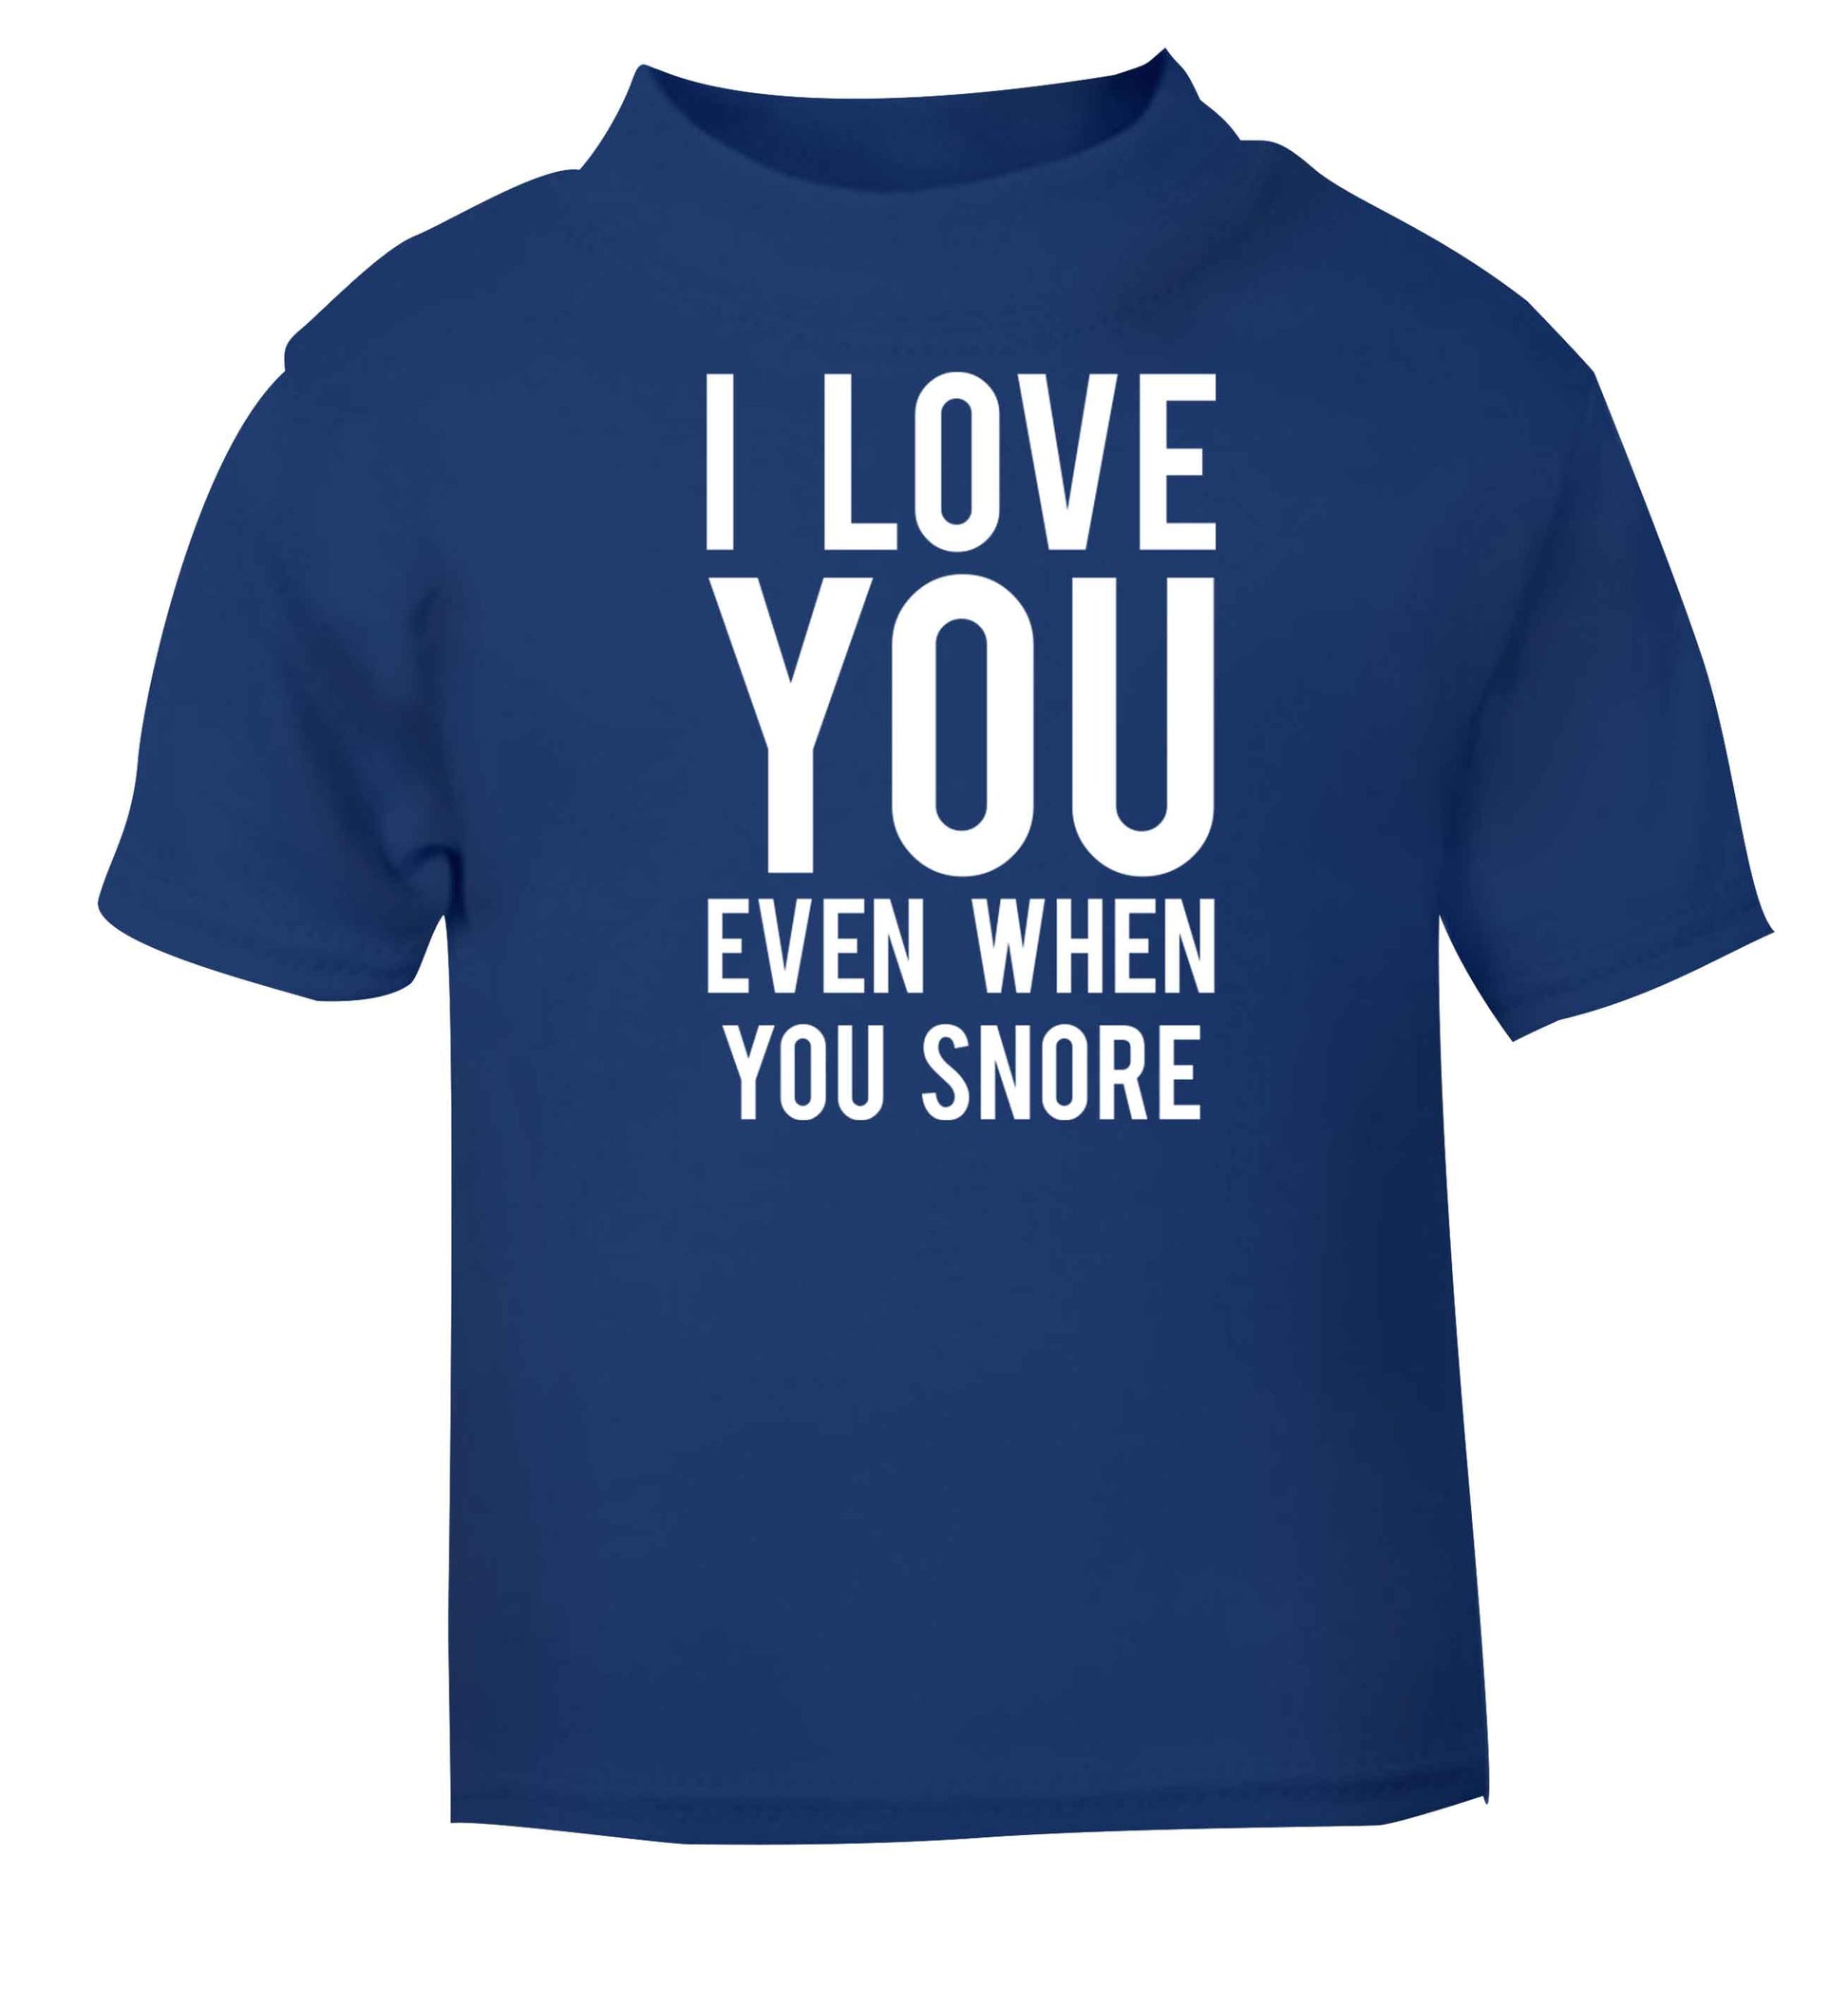 I love you even when you snore blue baby toddler Tshirt 2 Years